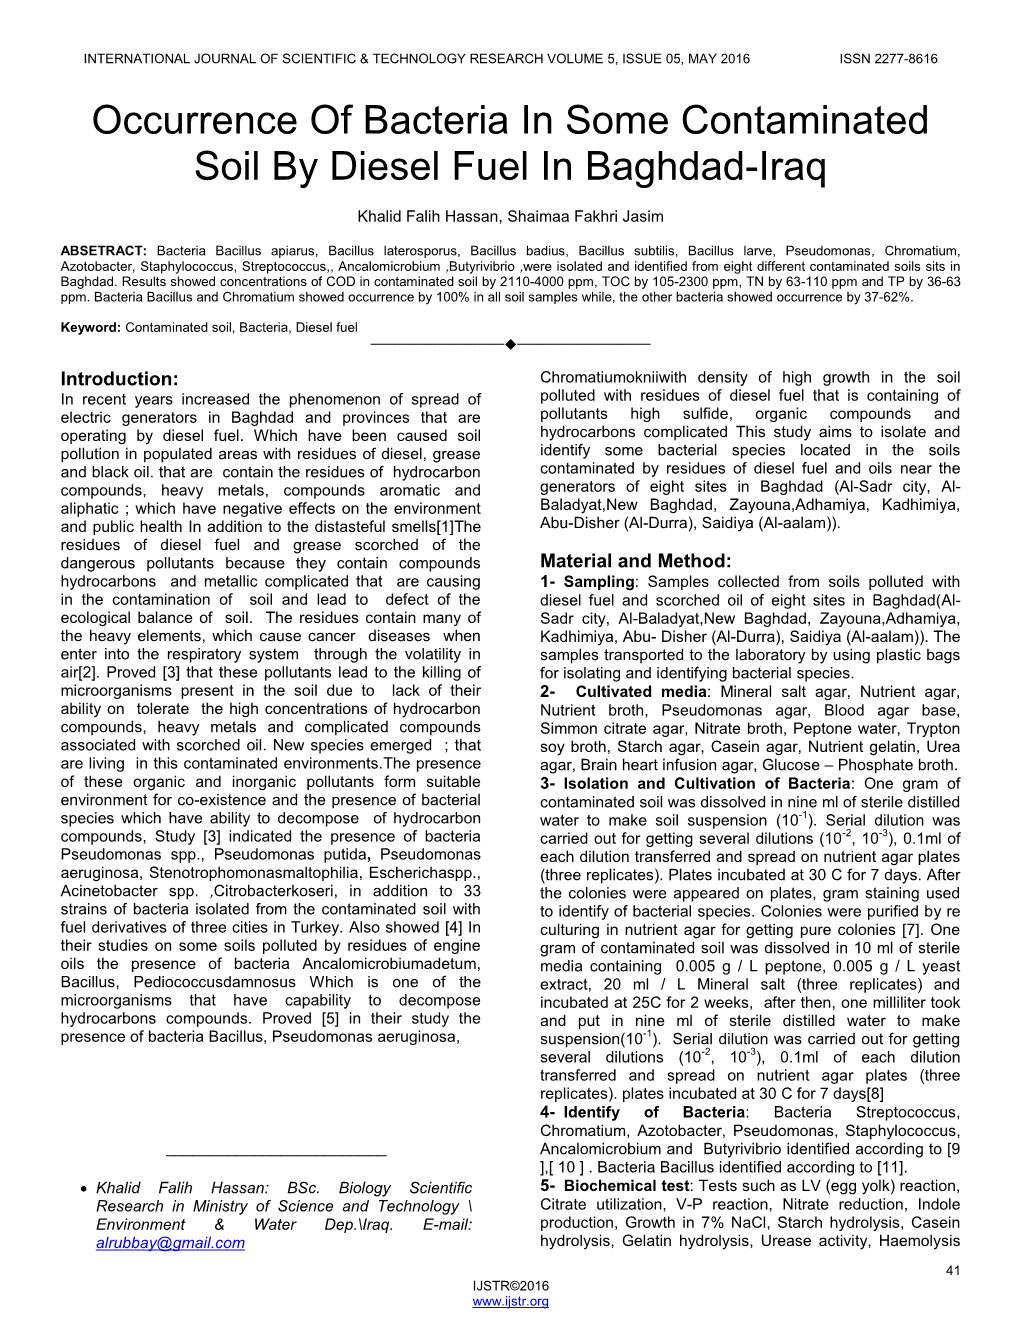 Occurrence of Bacteria in Some Contaminated Soil by Diesel Fuel in Baghdad-Iraq